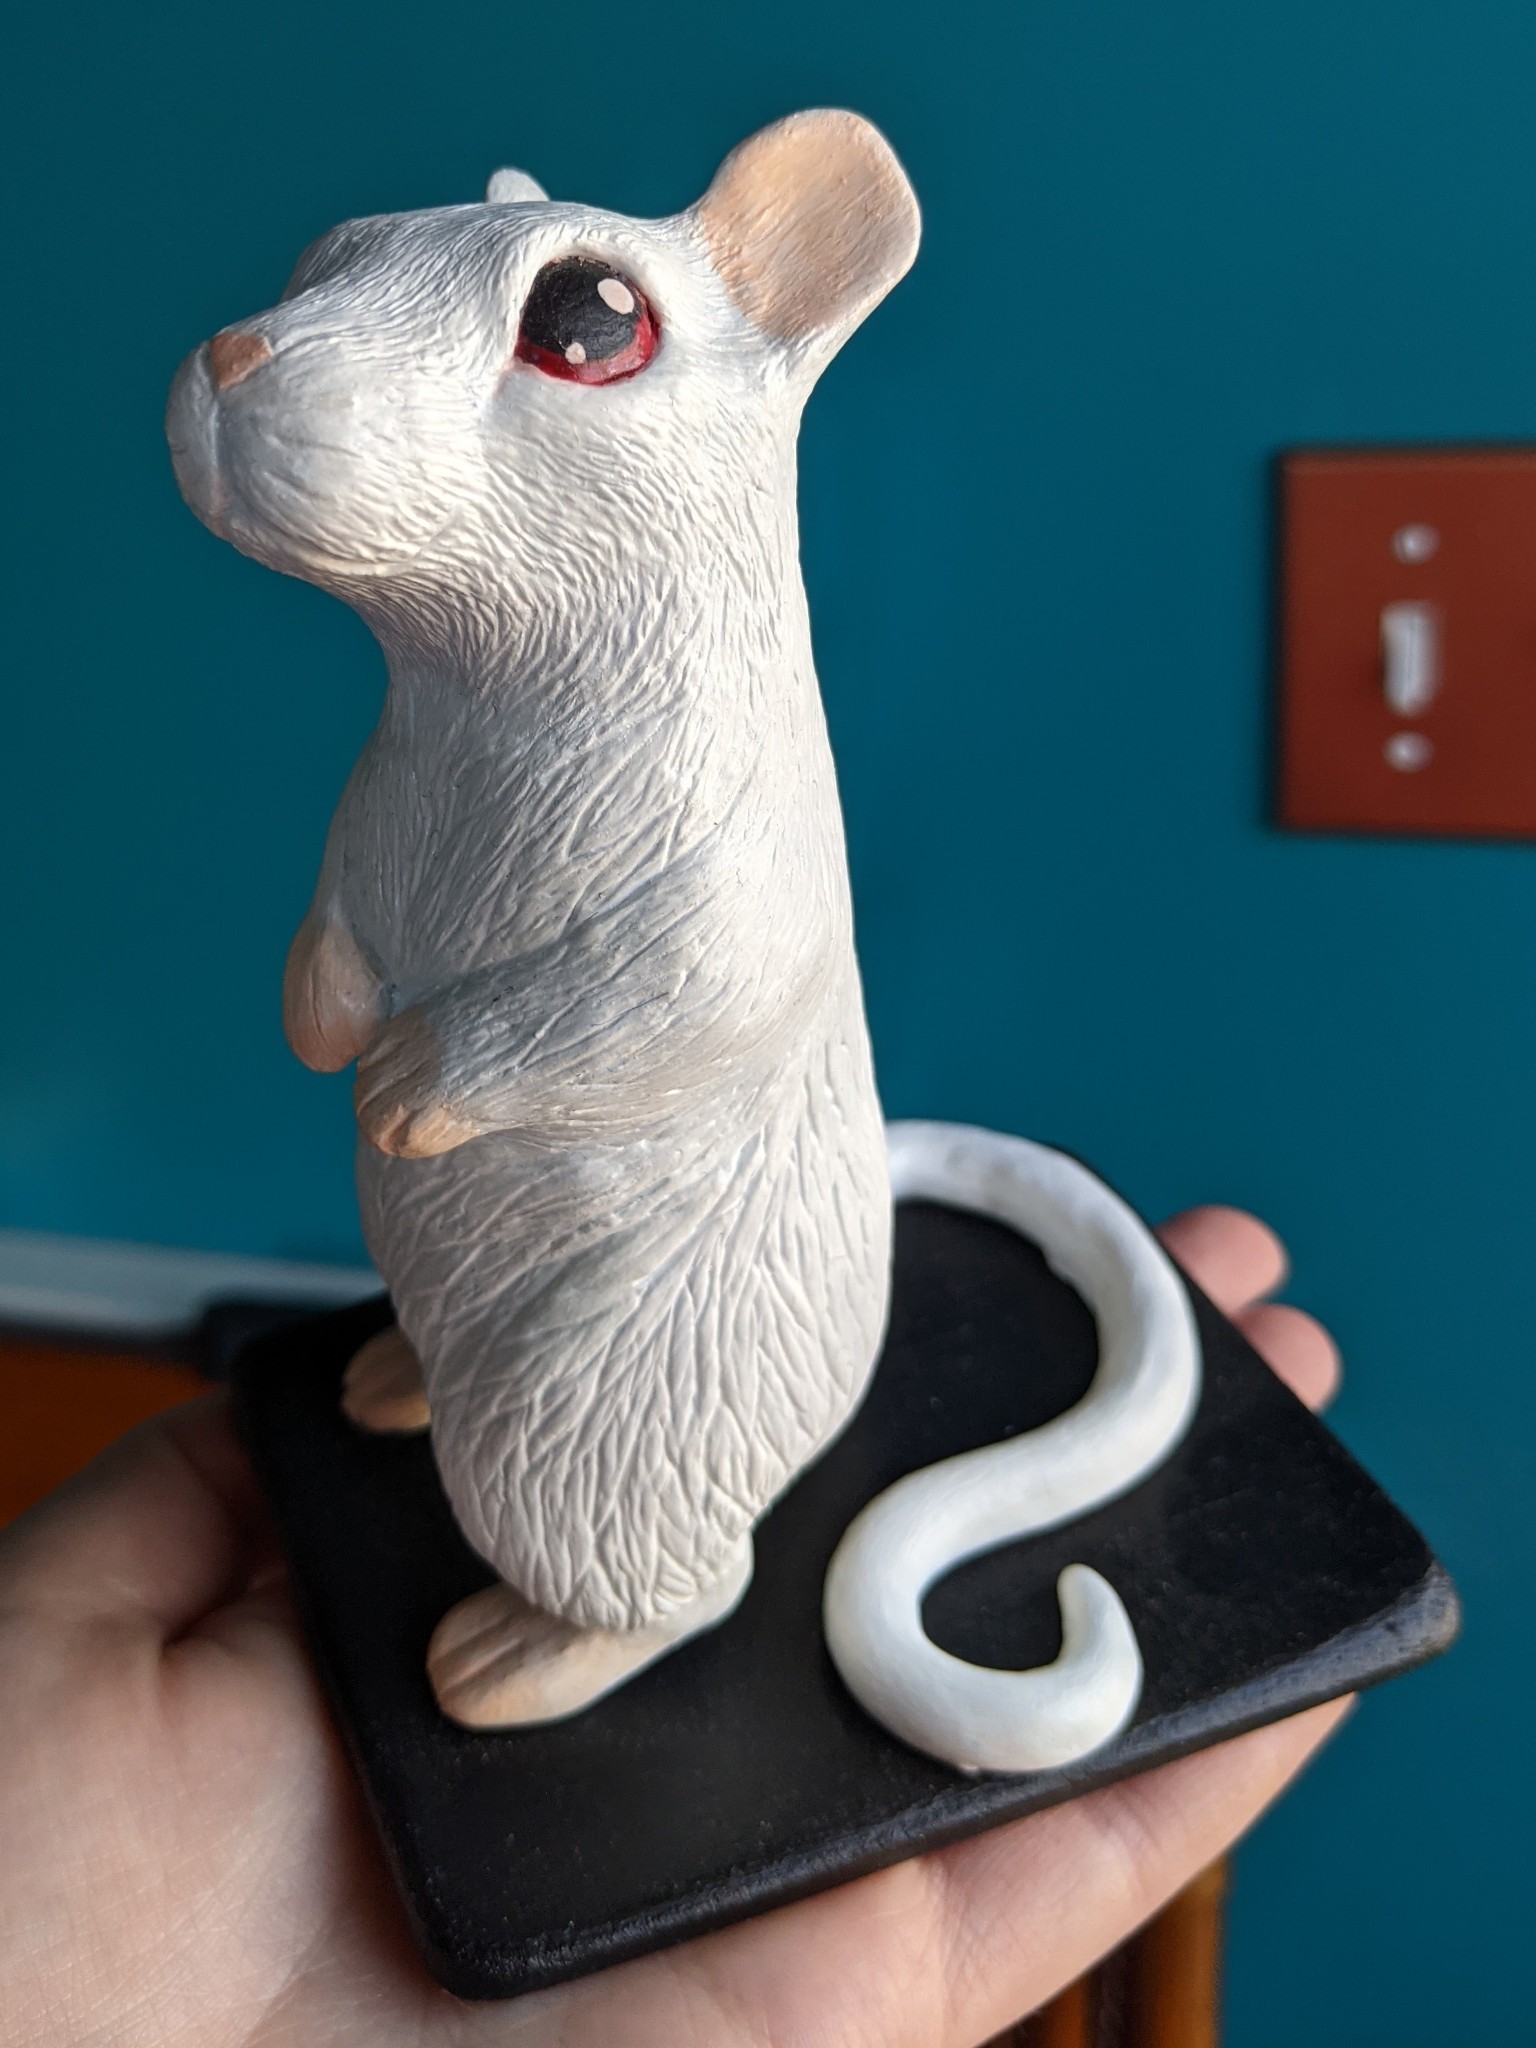 Sculpture of a white gerbil with red eyes standing on its hind legs